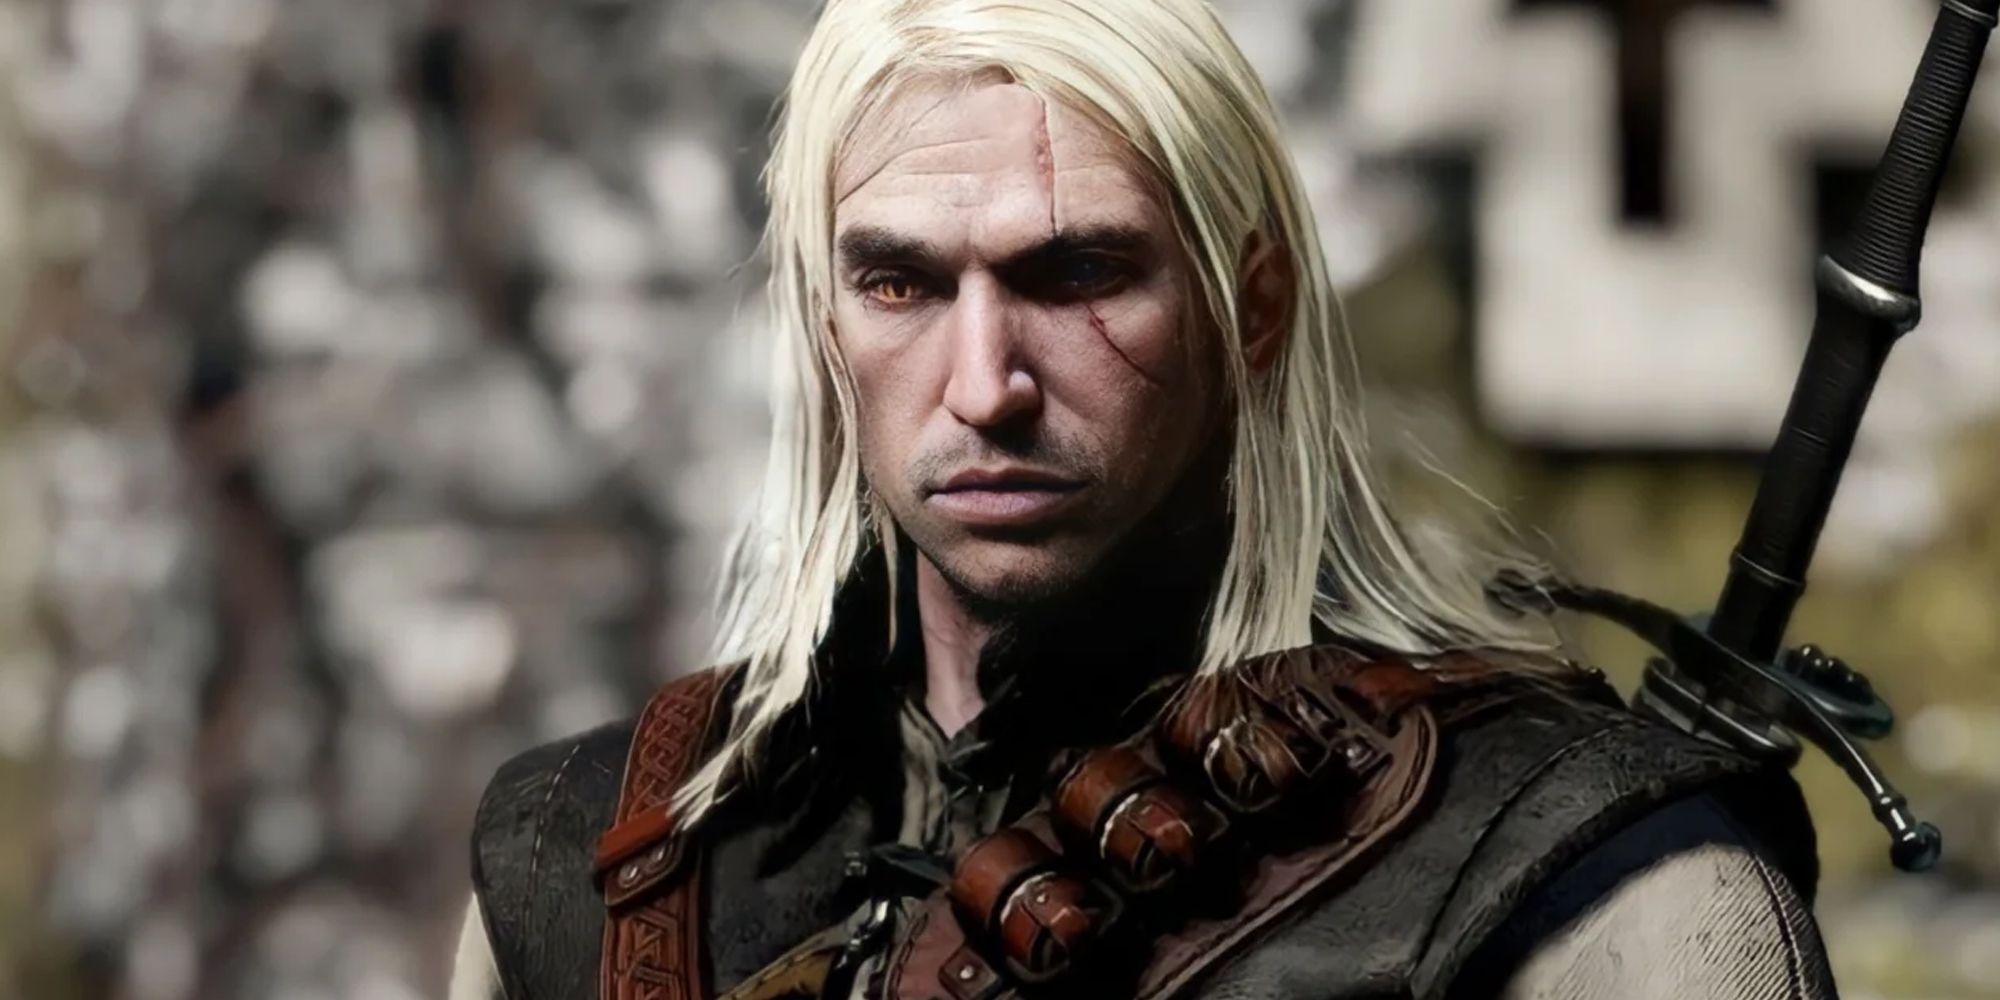 The Witcher 1 Reimagined (Fan Project by Arvy, @arvydas_b) : r/witcher